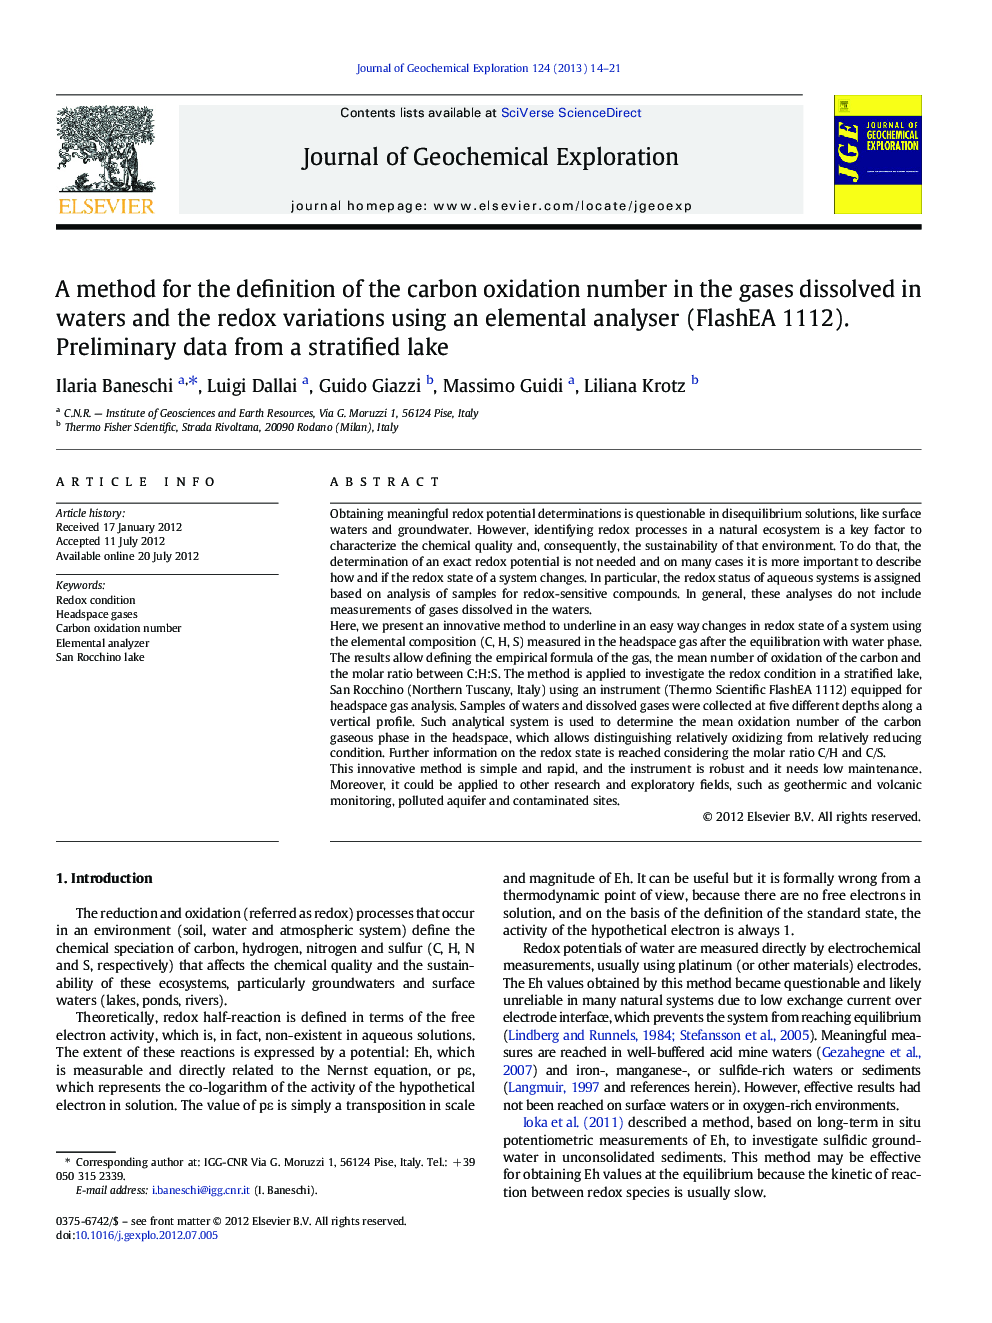 A method for the definition of the carbon oxidation number in the gases dissolved in waters and the redox variations using an elemental analyser (FlashEA 1112). Preliminary data from a stratified lake